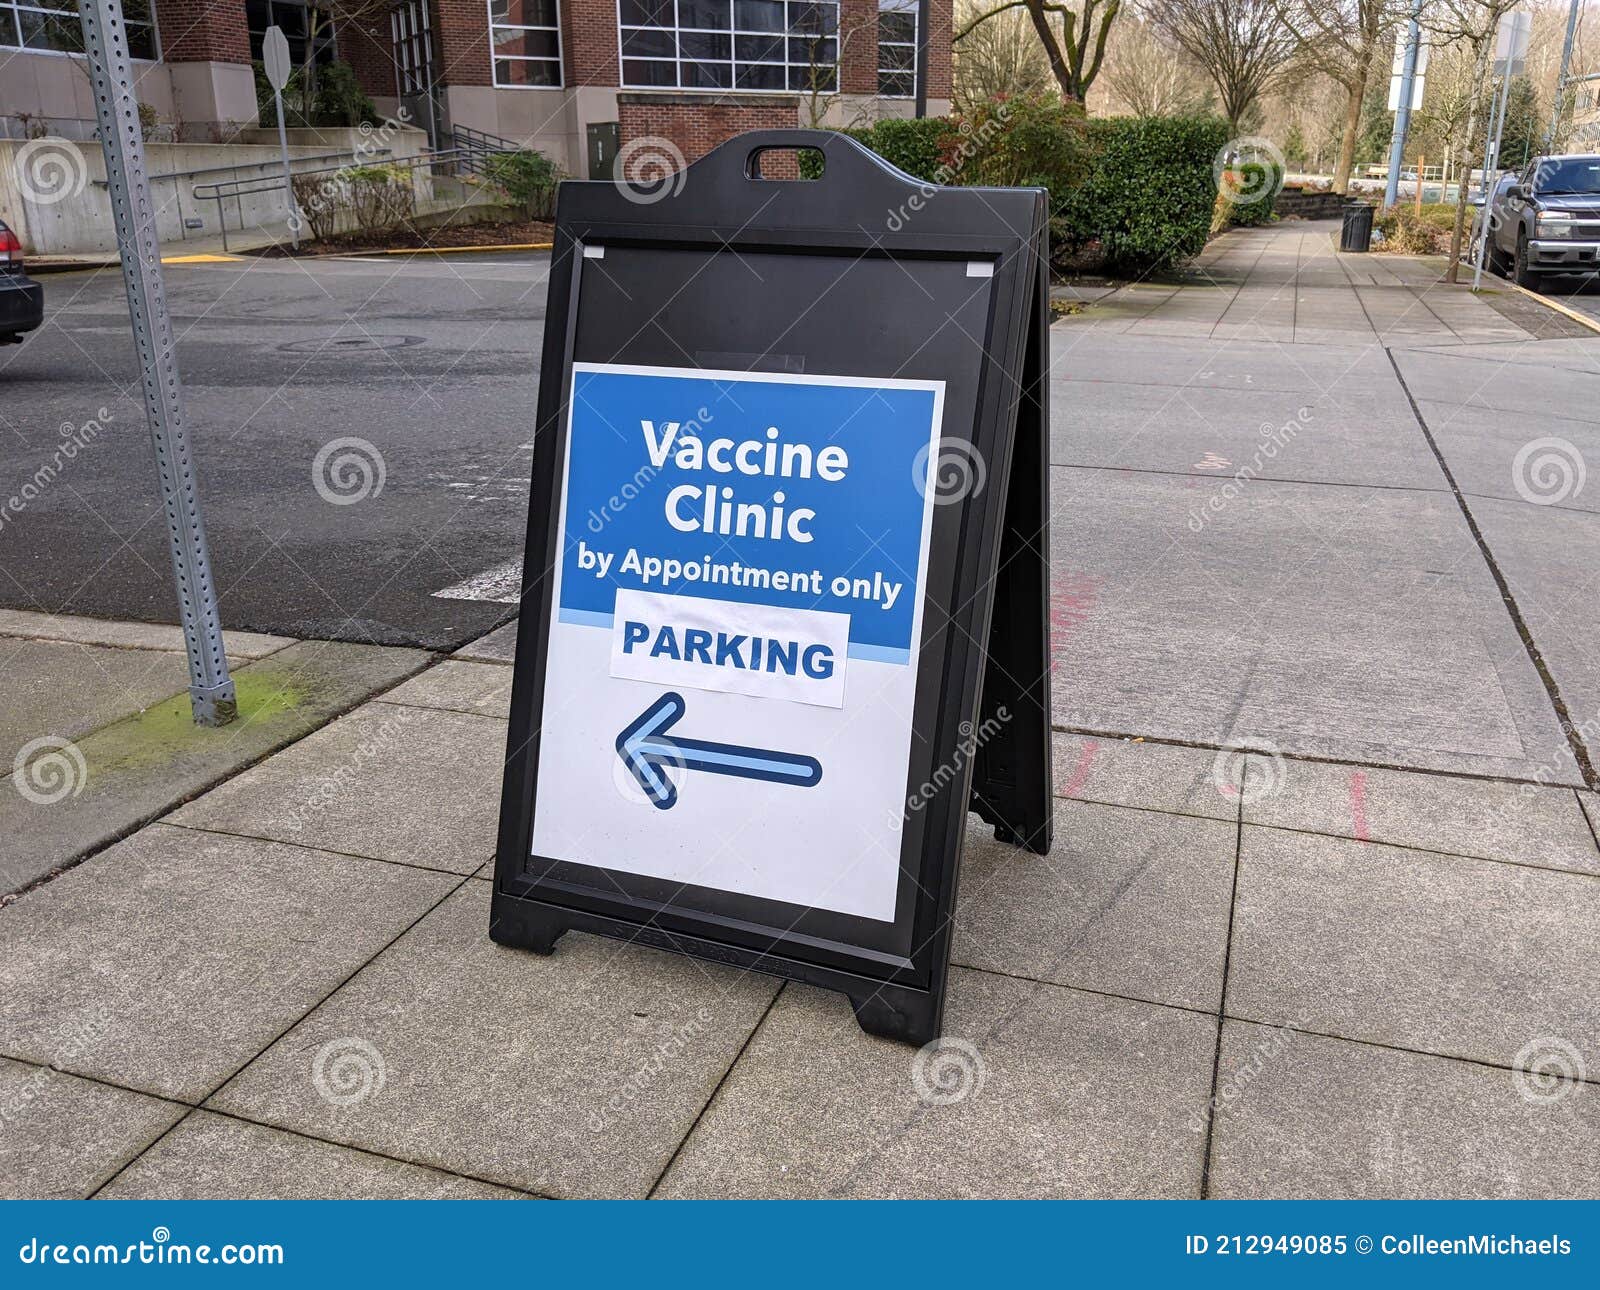 street view of a sign pointing out the way to a vaccine clinic